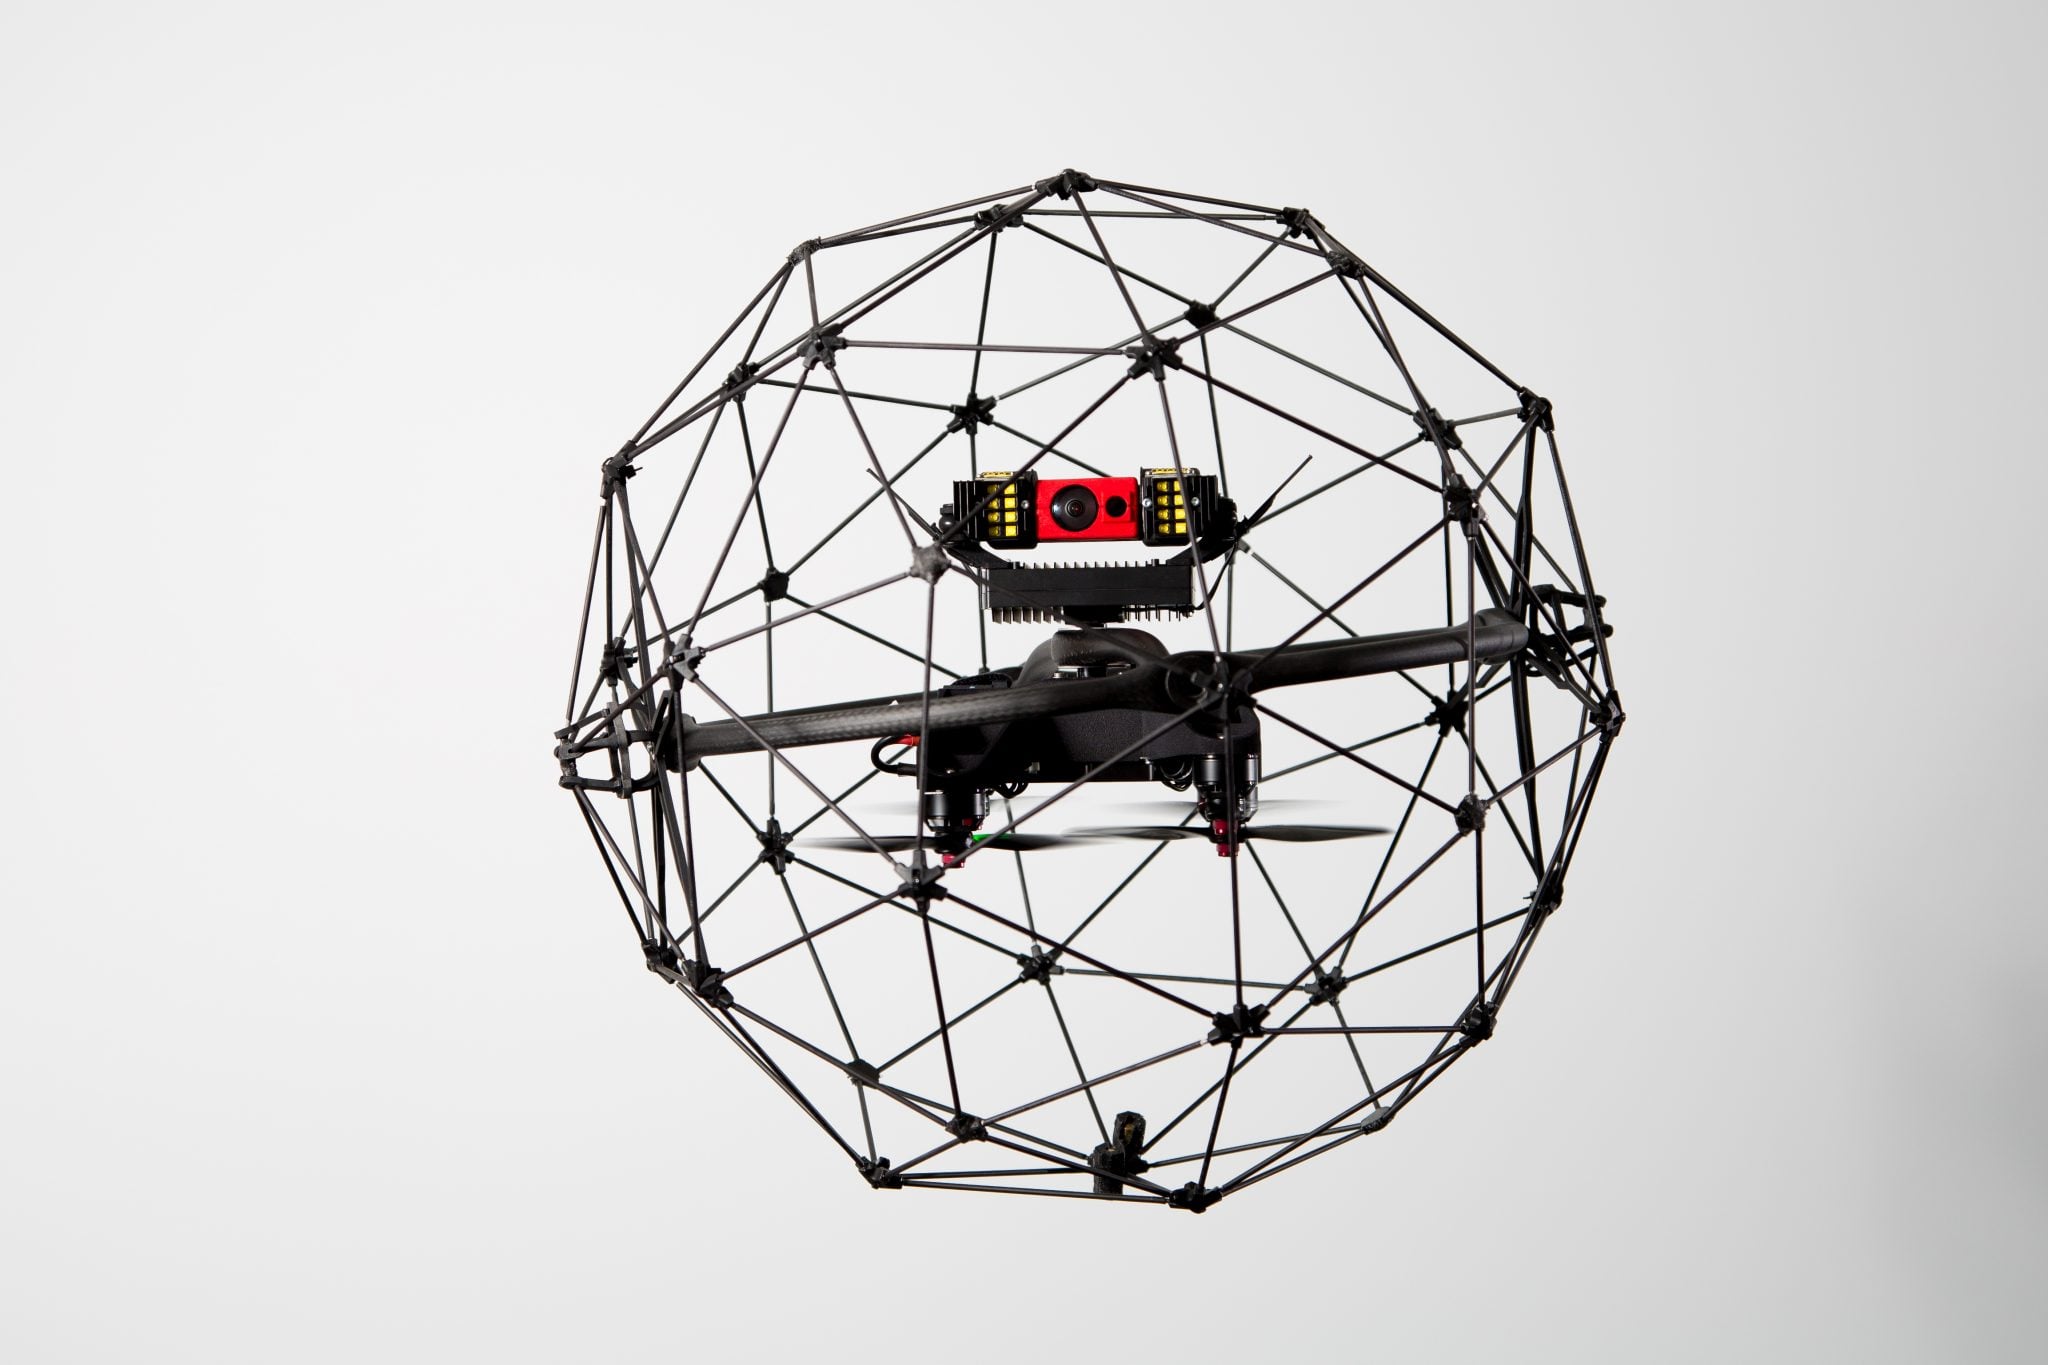 The Elios Inspection Drone by Flyability with 4k and thermal camera.